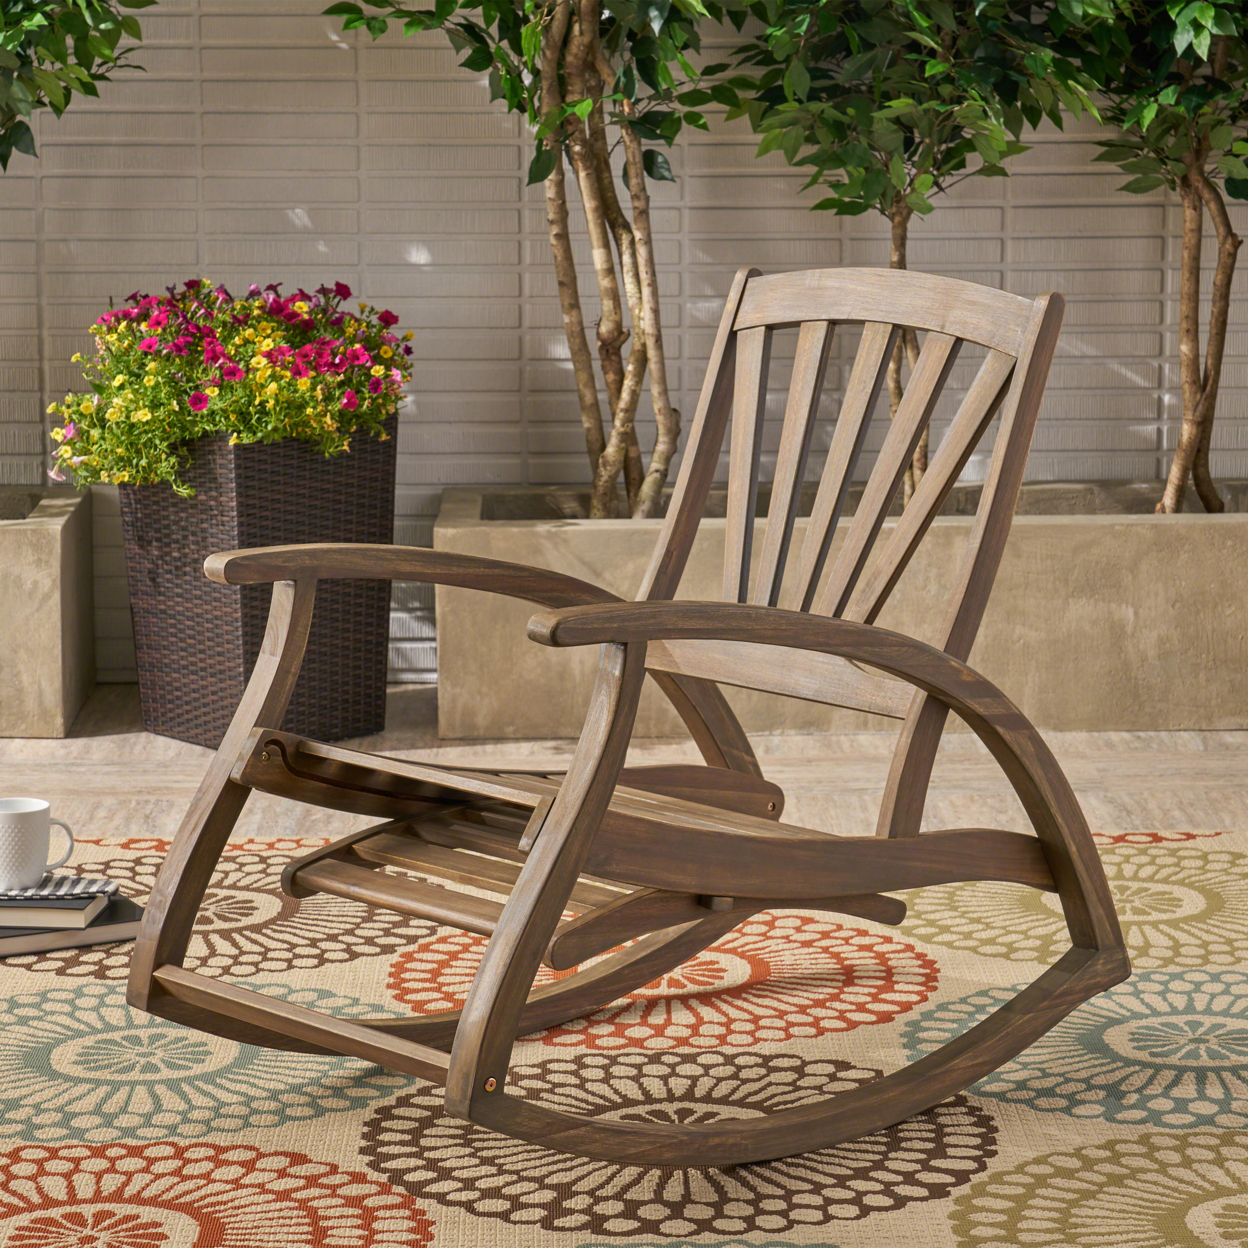 Alva Outdoor Acacia Wood Rocking Chair With Footrest - Gray Finish